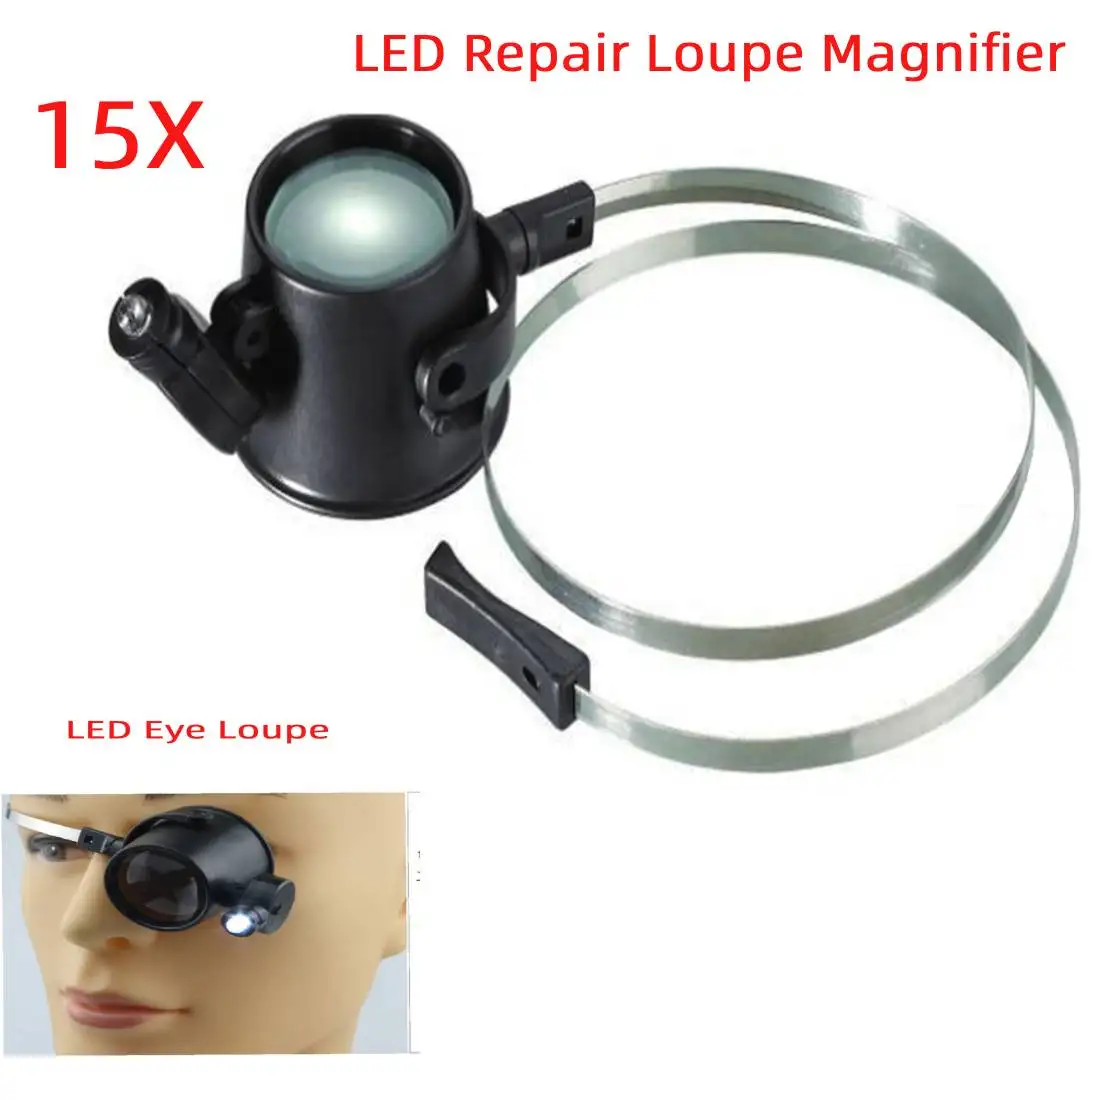 

Portable 15X Headband Eye LED Magnifier Loupe Jewelers Circuit Magnifying Glass Watchmakers Head Mounted